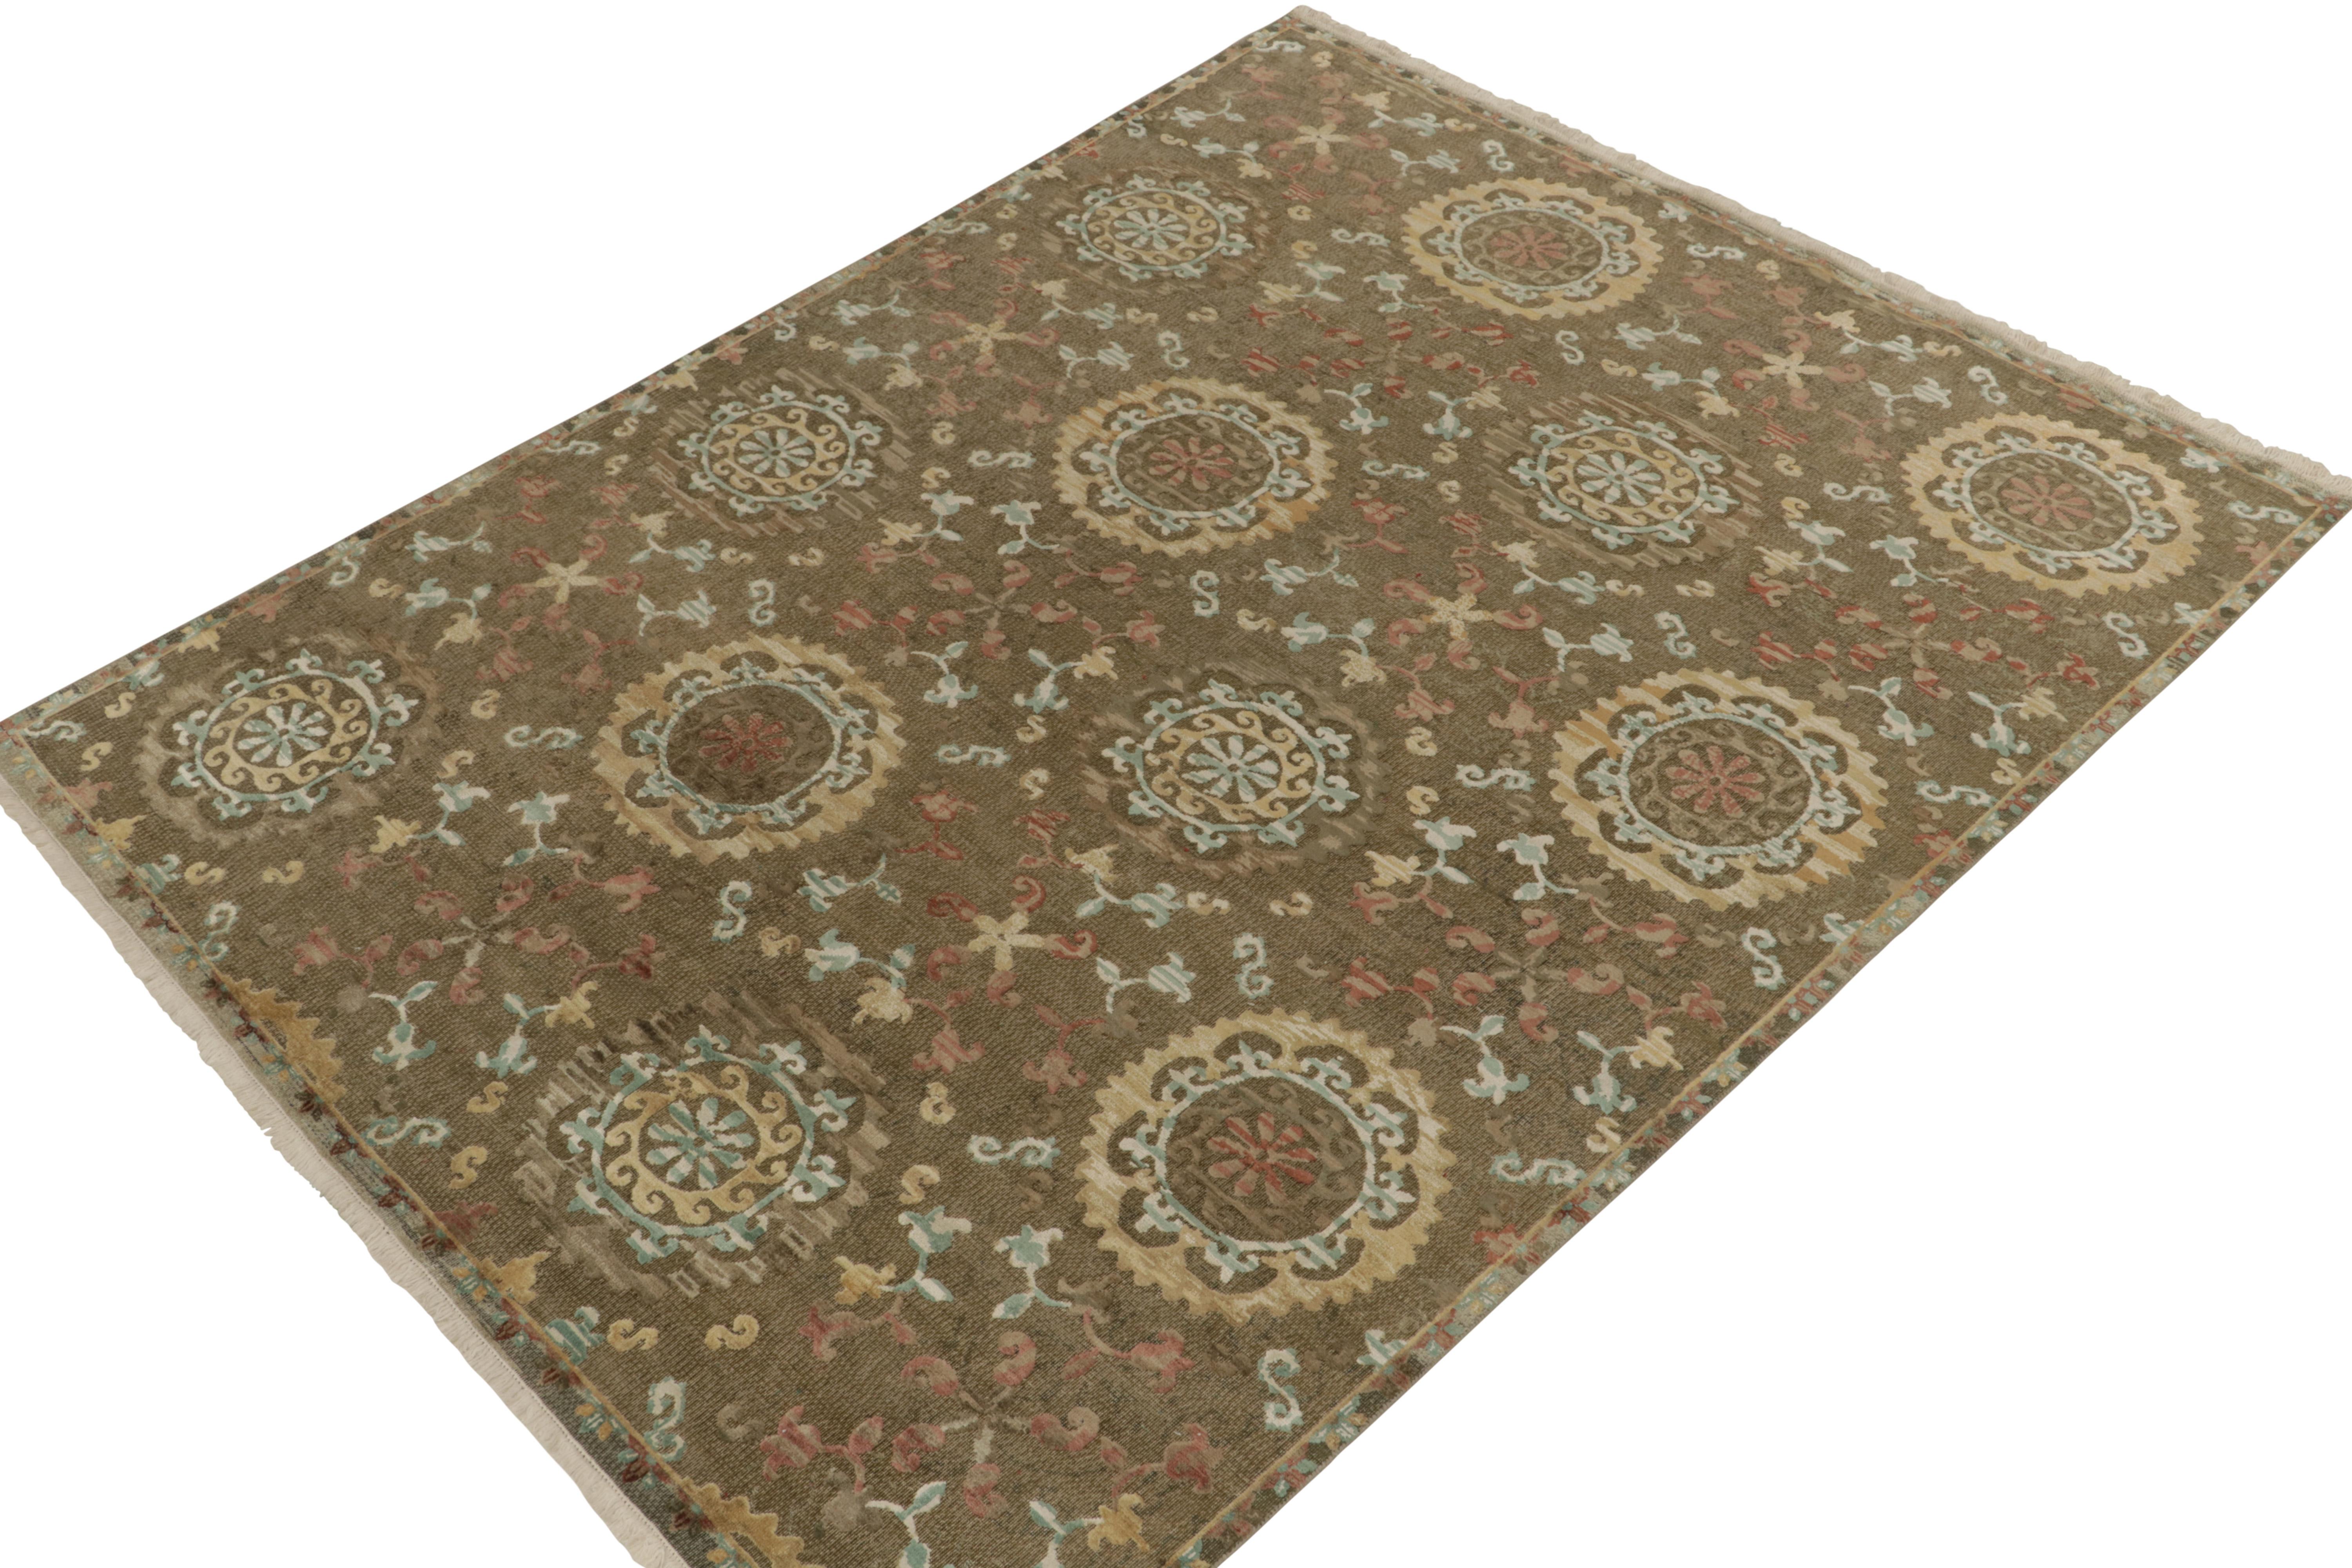 Handknotted in luxurious silk, this 8x10 contemporary rug from our Modern Classics collection is particularly inspired by antique Spanish rugs. The gracious scale revels in wheel-style floral medallions in beige-brown, gold & blue colorways with a